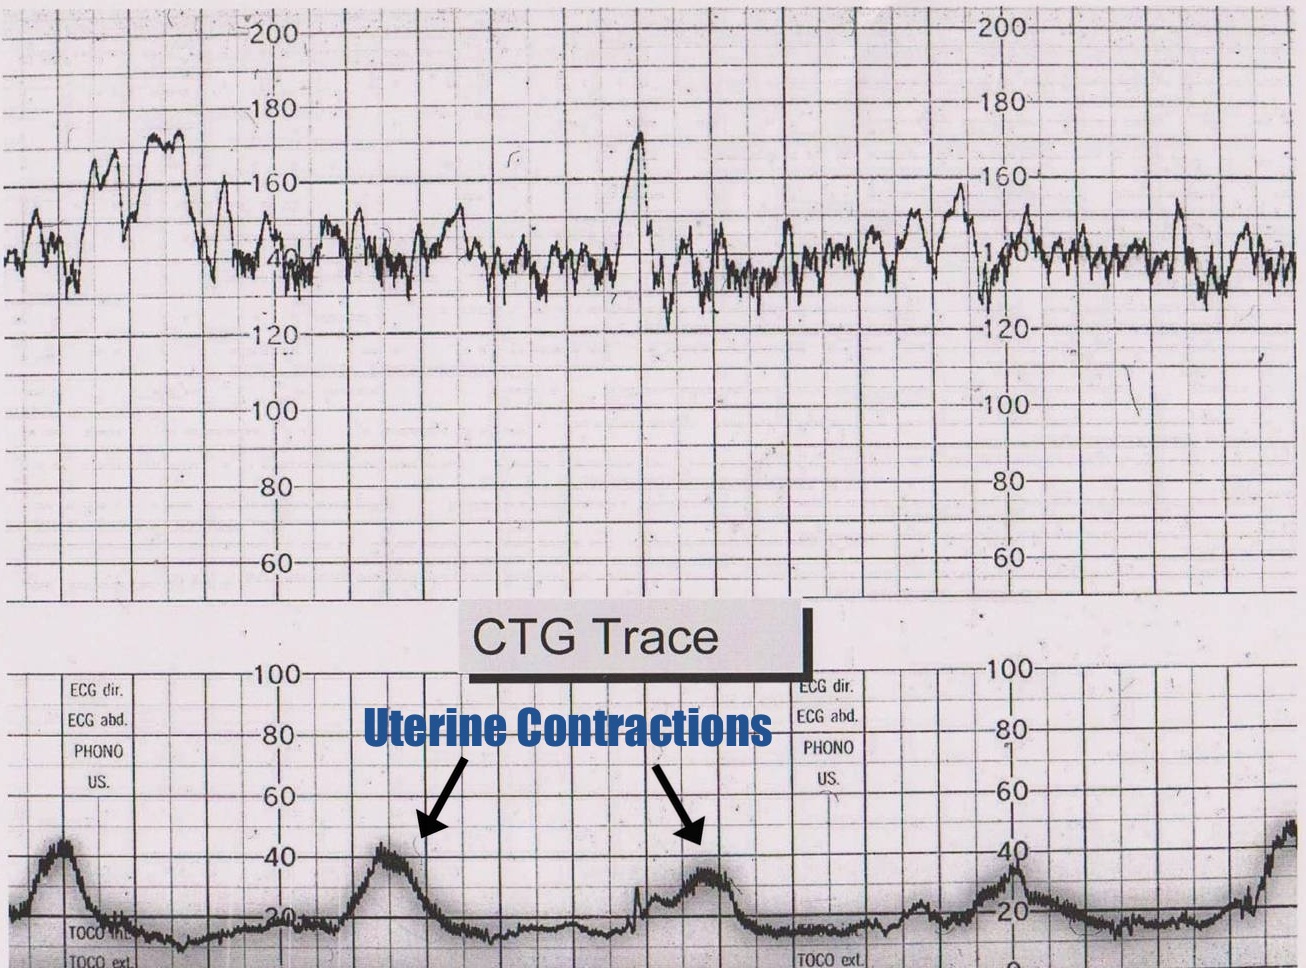 Uterine contractions are shown on the bottom topography reading (source). 